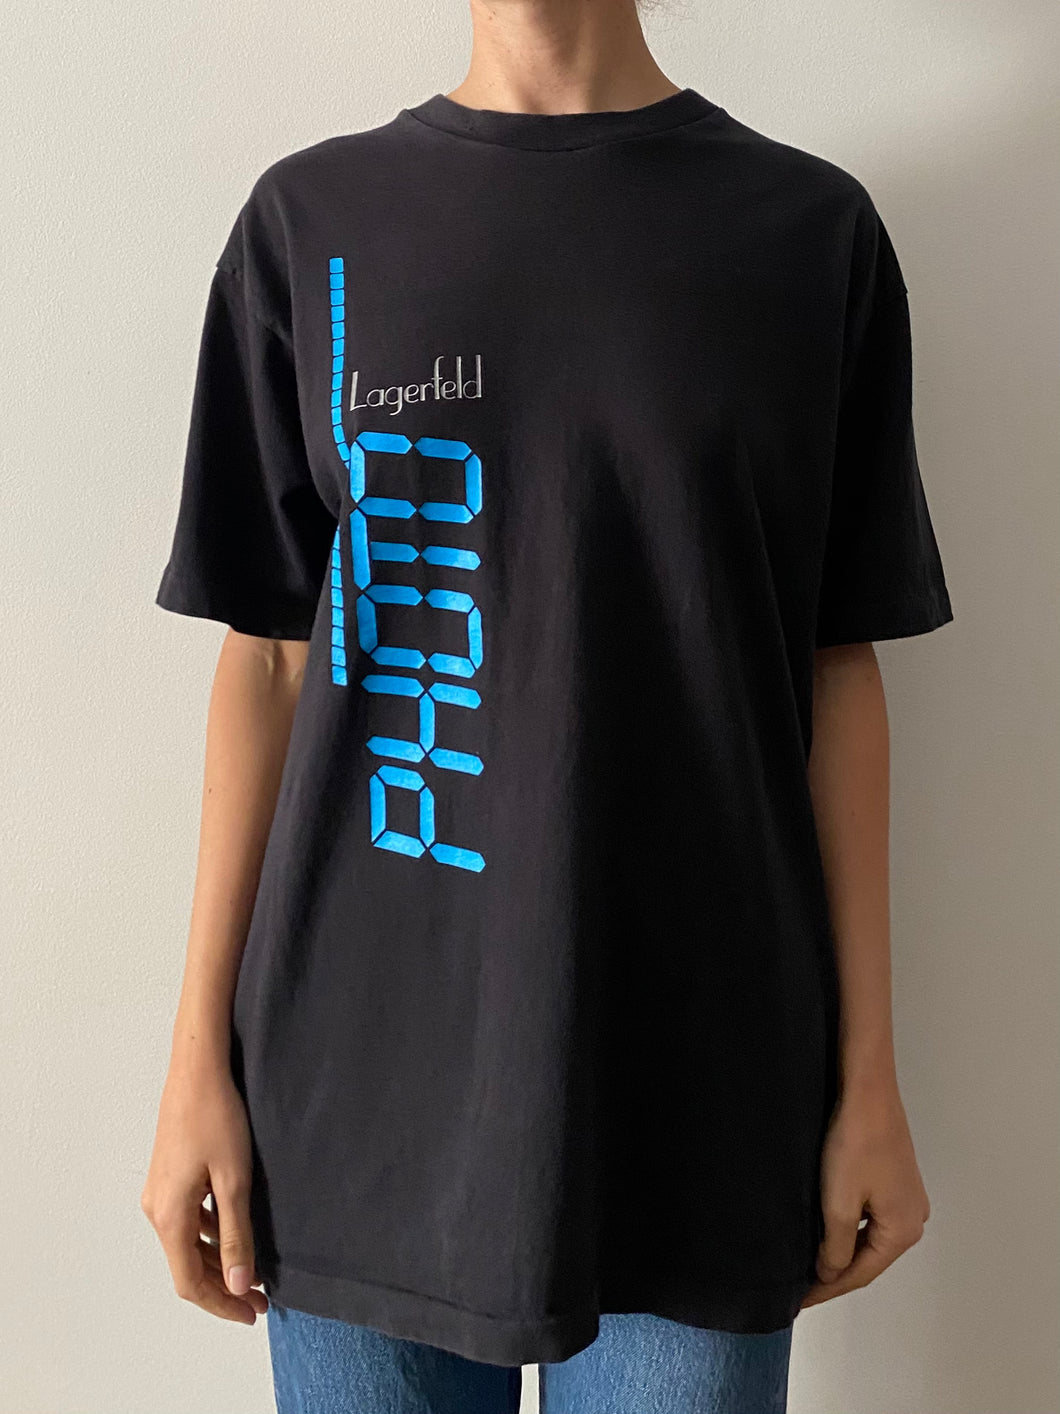 90s Lagerfeld Photo Cologne tee